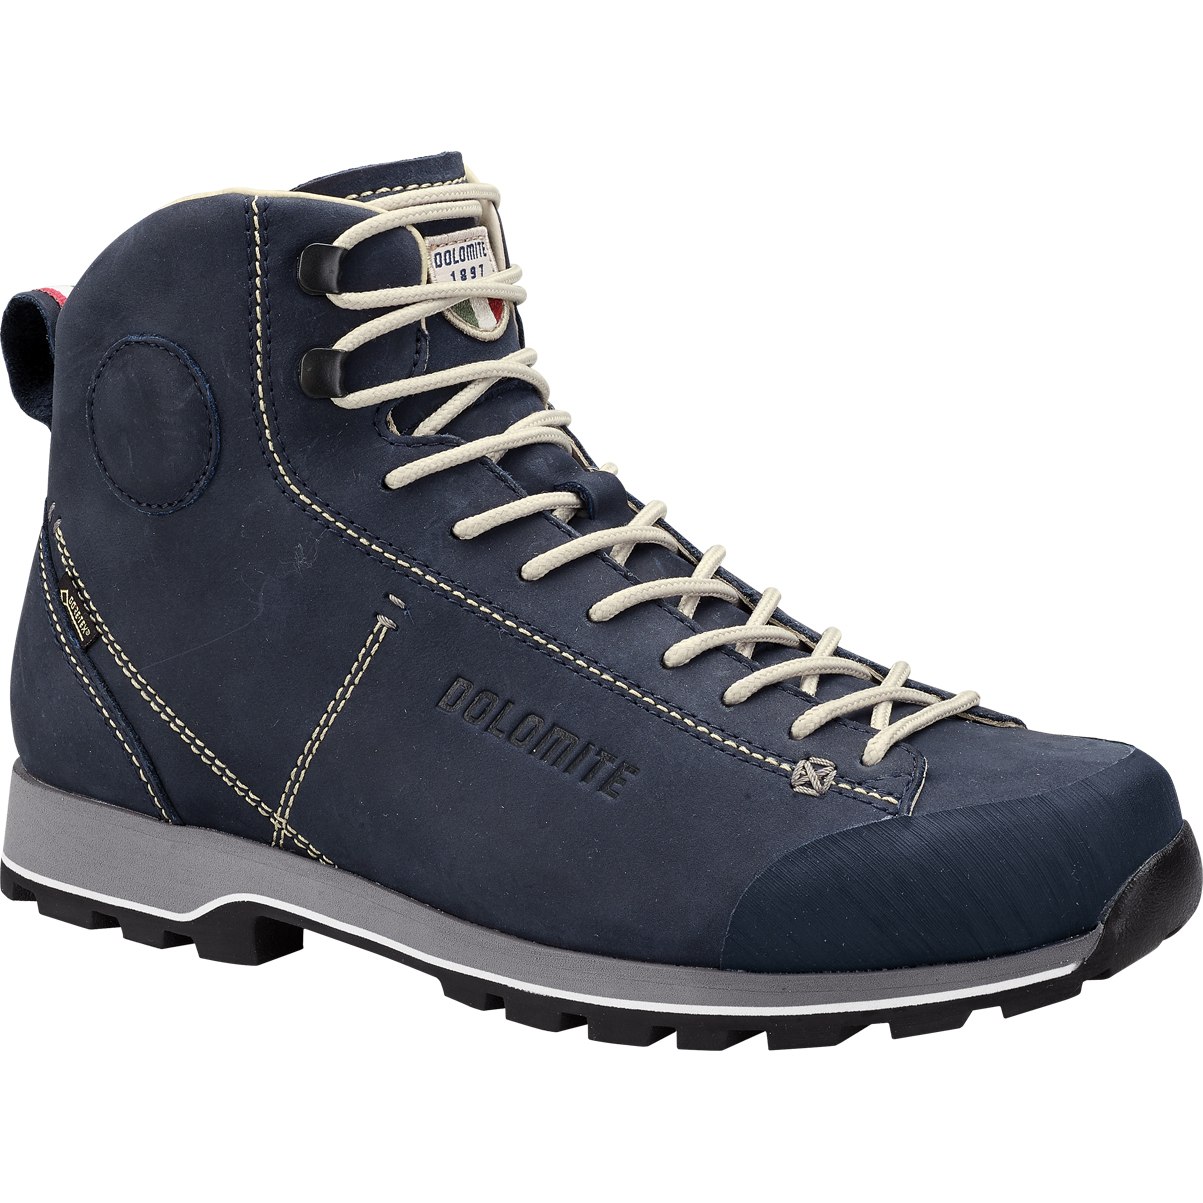 Picture of Dolomite 54 High Fg GTX Shoe - blue navy